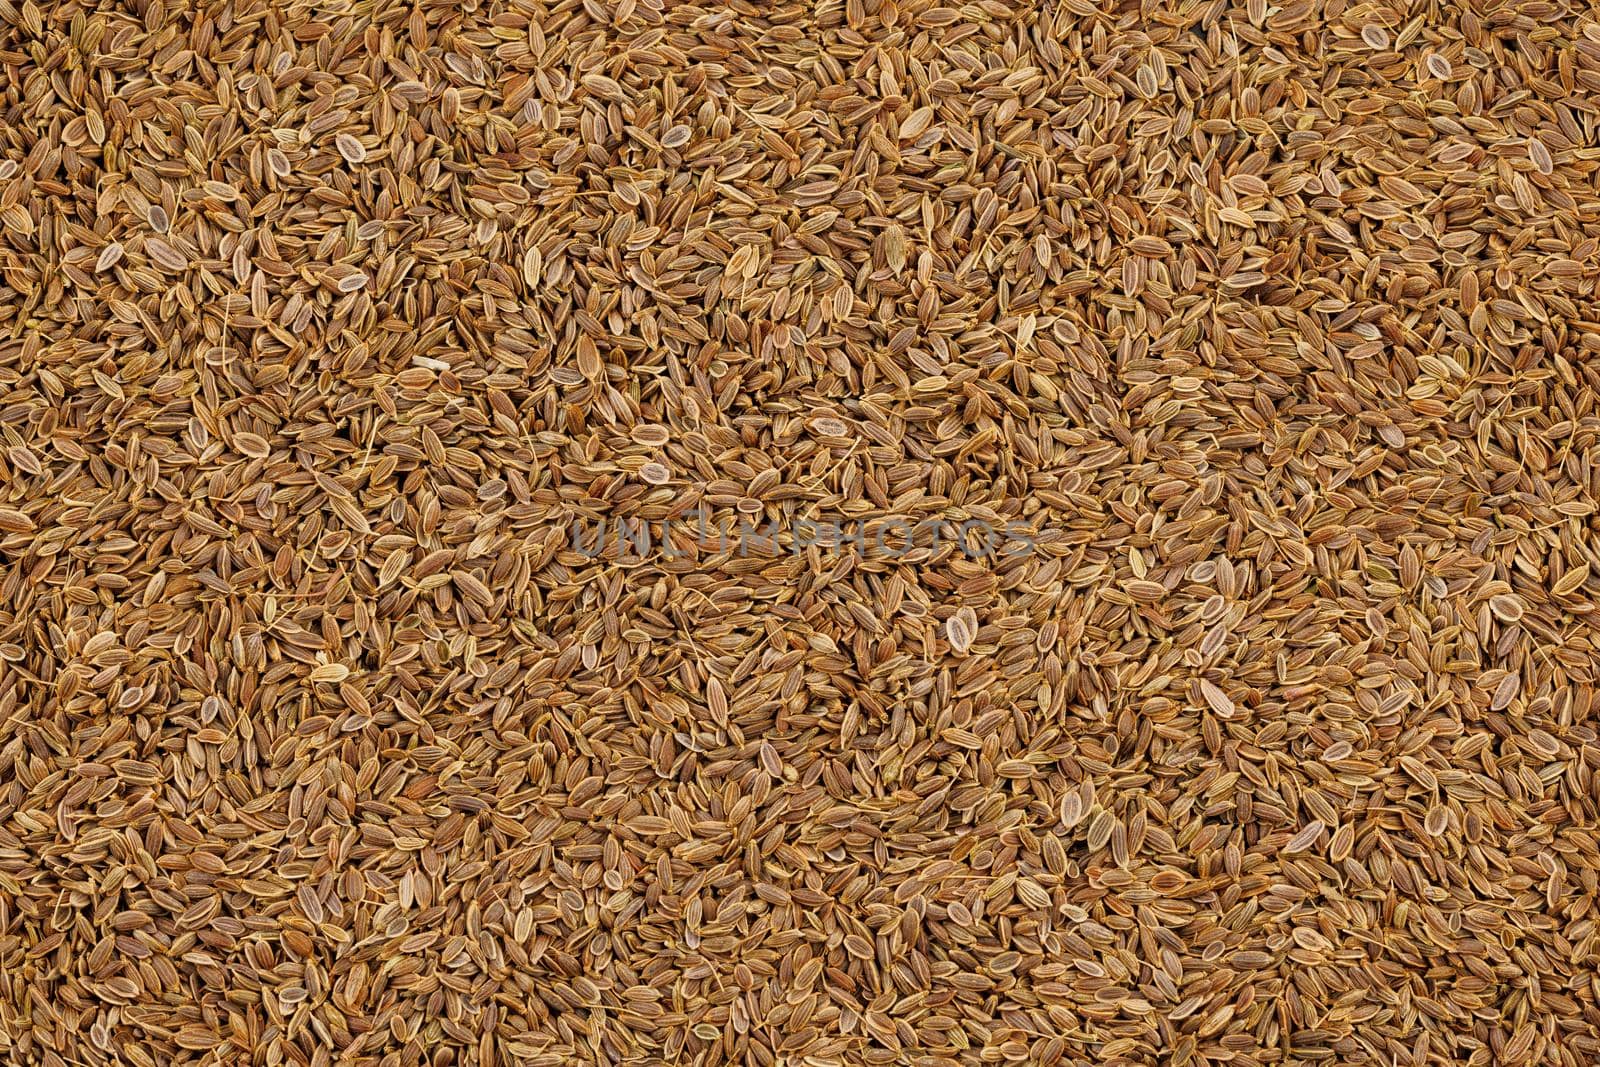 dry dill seeds on flat surface, flat texture and full-frame background by z1b